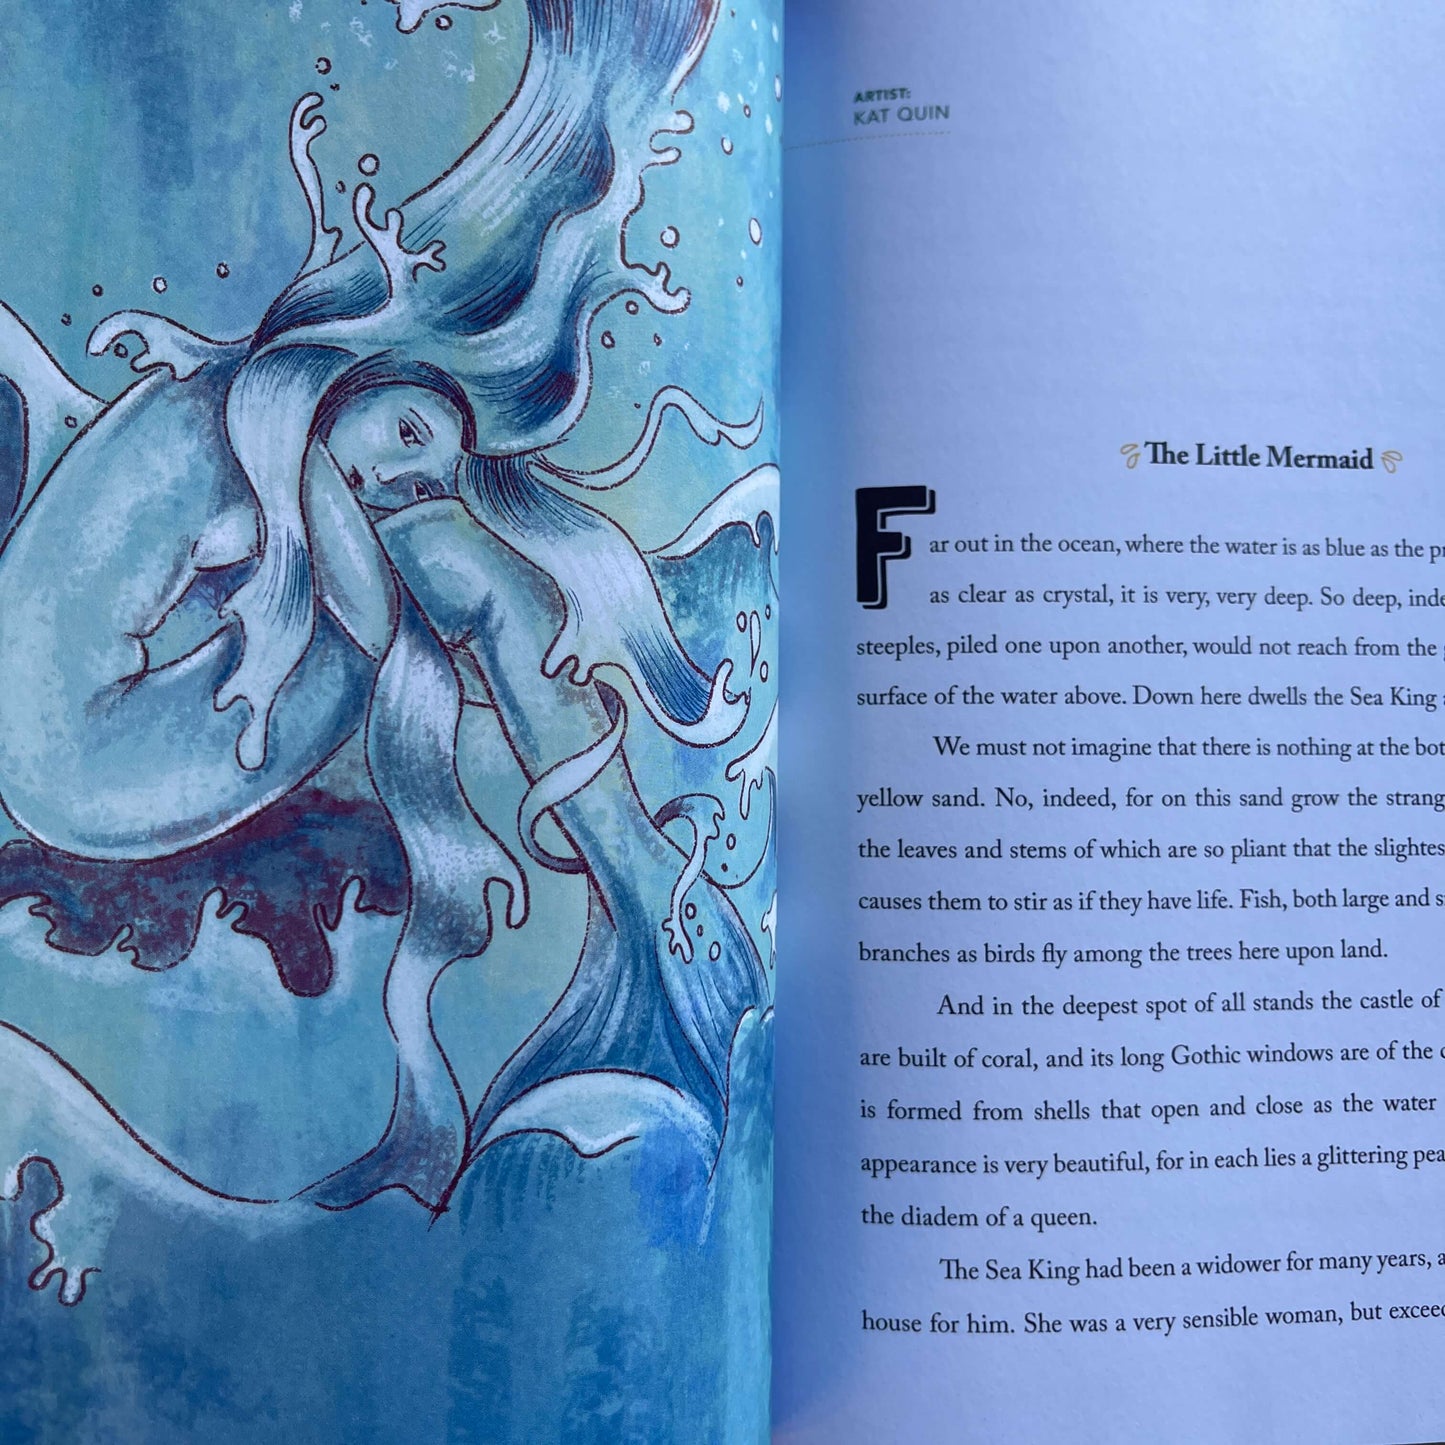 Page from Hardcover book Diamonds & Toads, a collection of classic fairytales for a new generation of boys and girls.